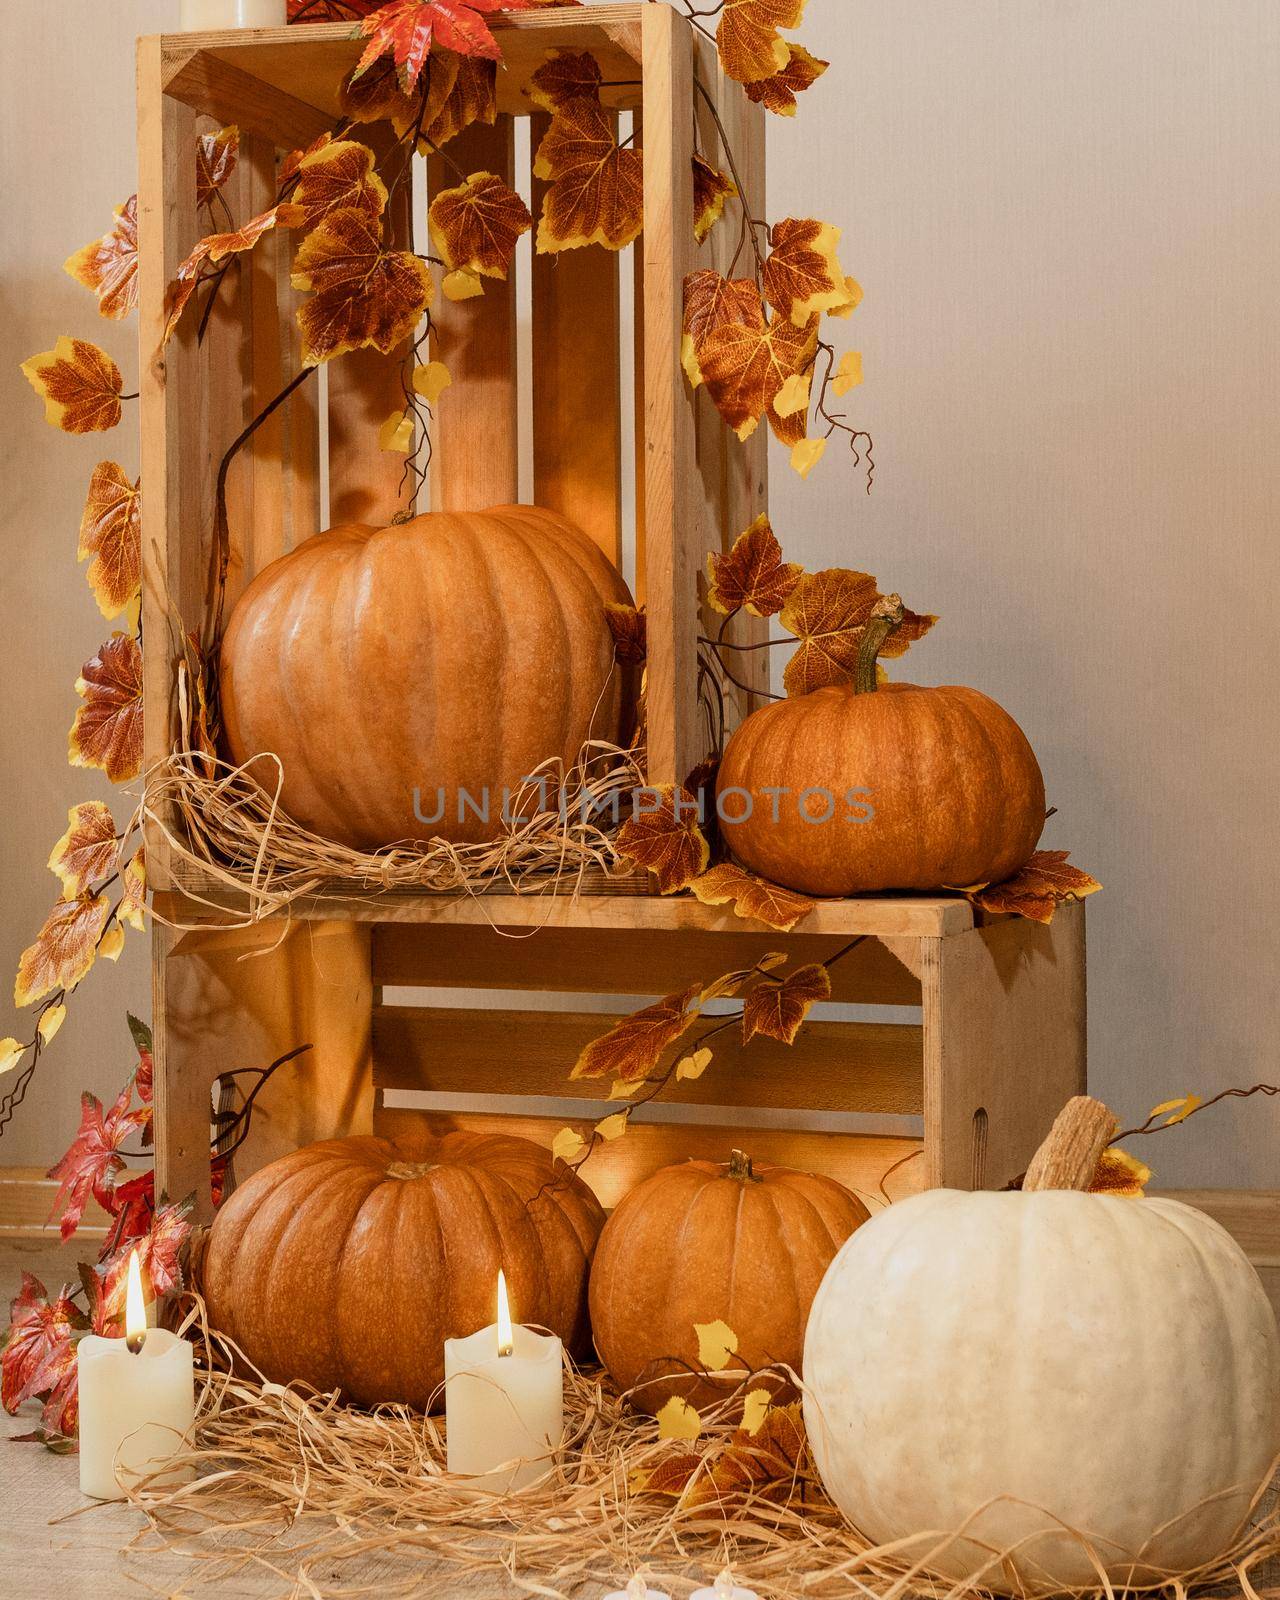 Halloween Pumpkins in the wooden crates with candles, straw, autumn leaves by ferhad